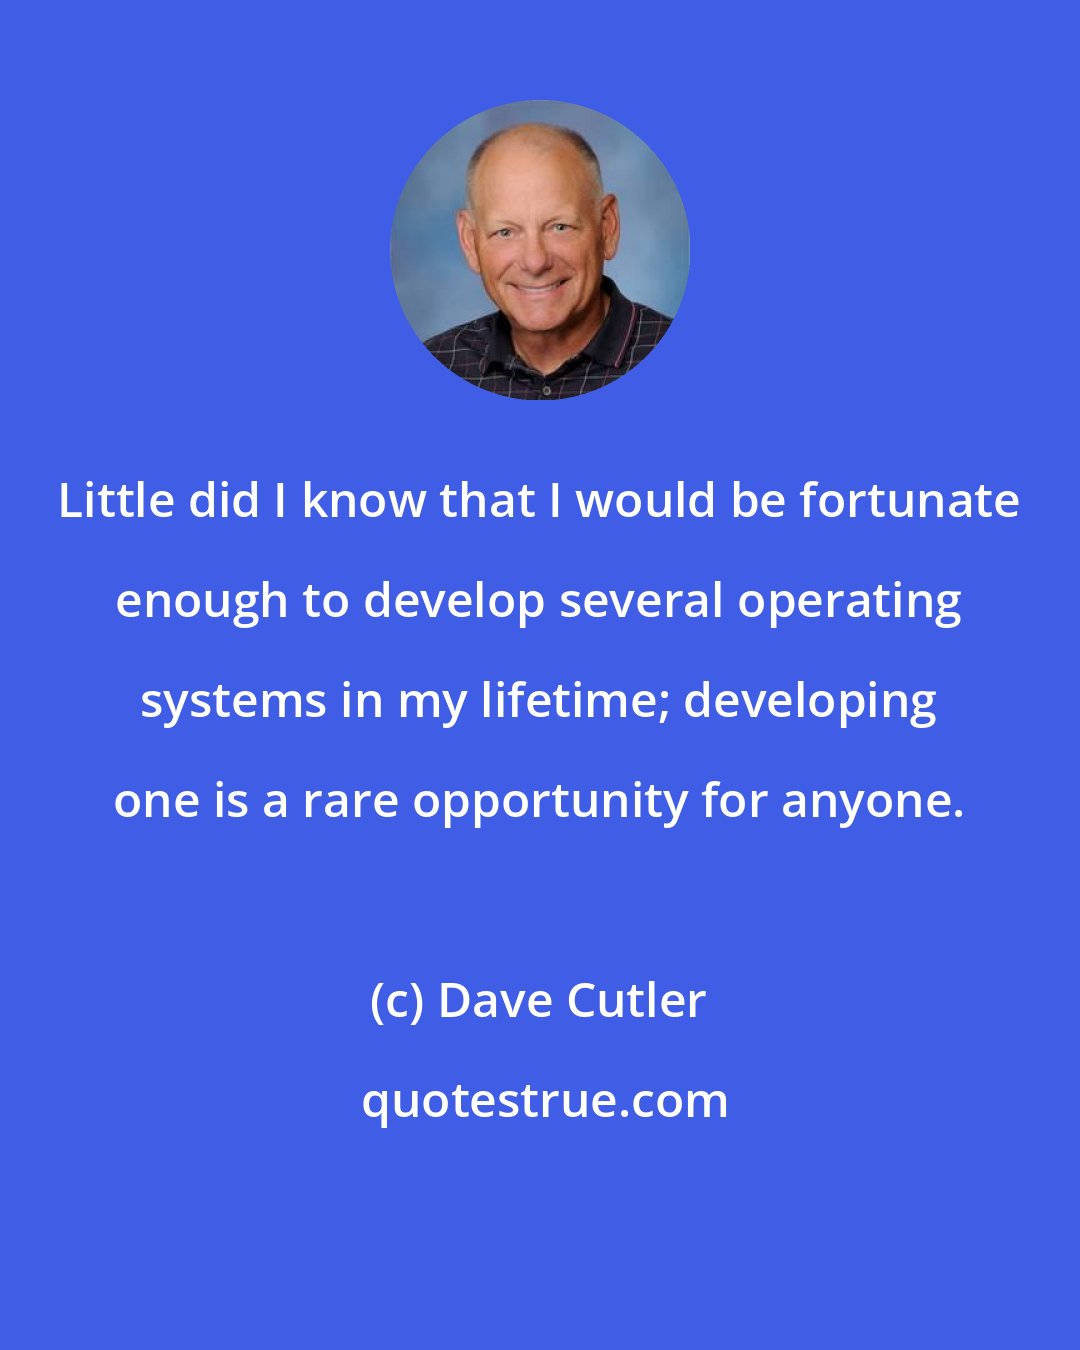 Dave Cutler: Little did I know that I would be fortunate enough to develop several operating systems in my lifetime; developing one is a rare opportunity for anyone.